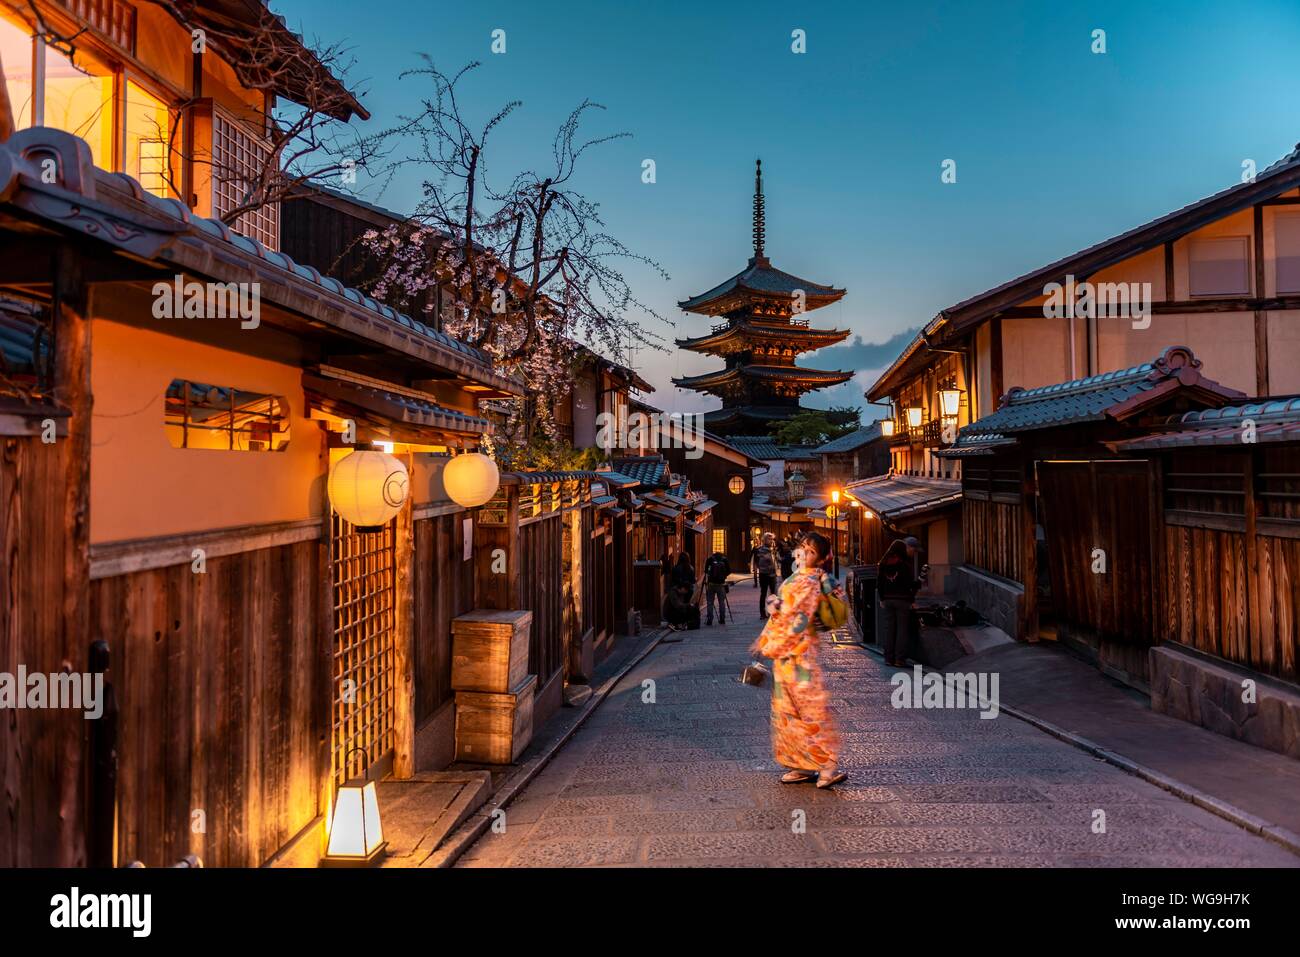 Woman in Kimono posing in an alley, Yasaka dori historical alleyway in the old town with traditional Japanese houses, back five-storey Yasaka pagoda Stock Photo